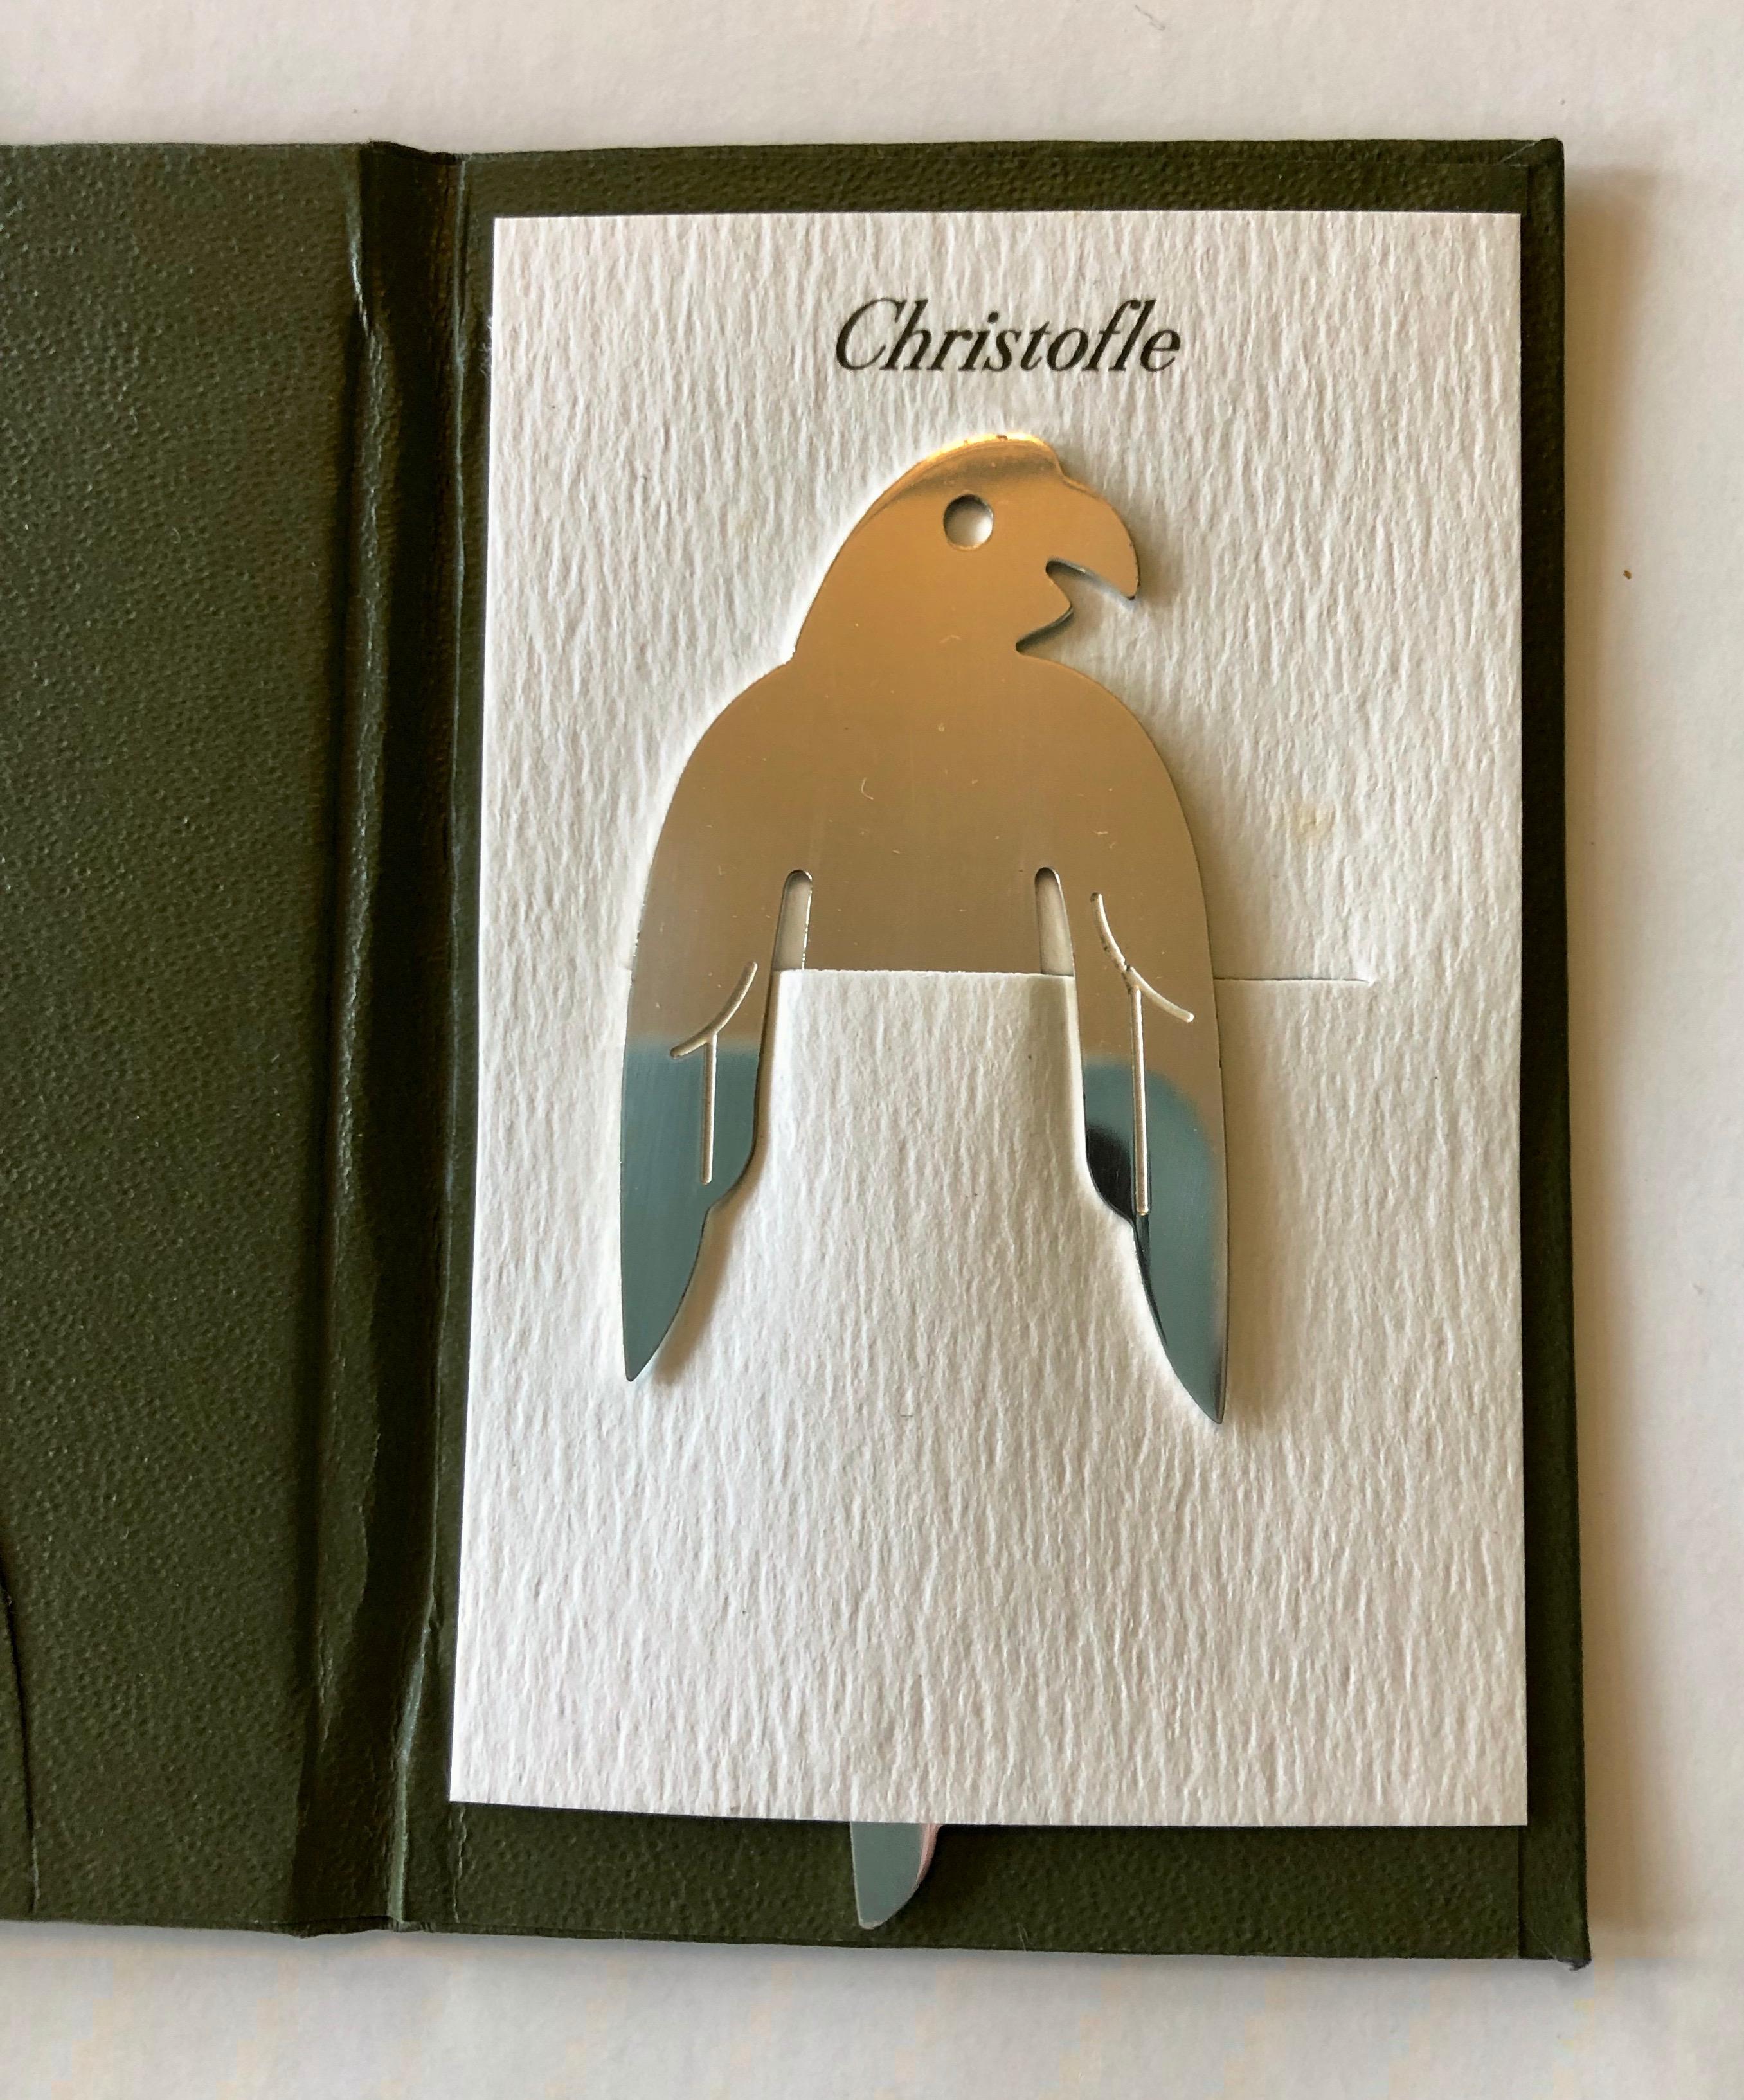 This is a wonderful French Christofle silver plated parrot book page marker. It is new, never used and comes with it's case and envelope. (